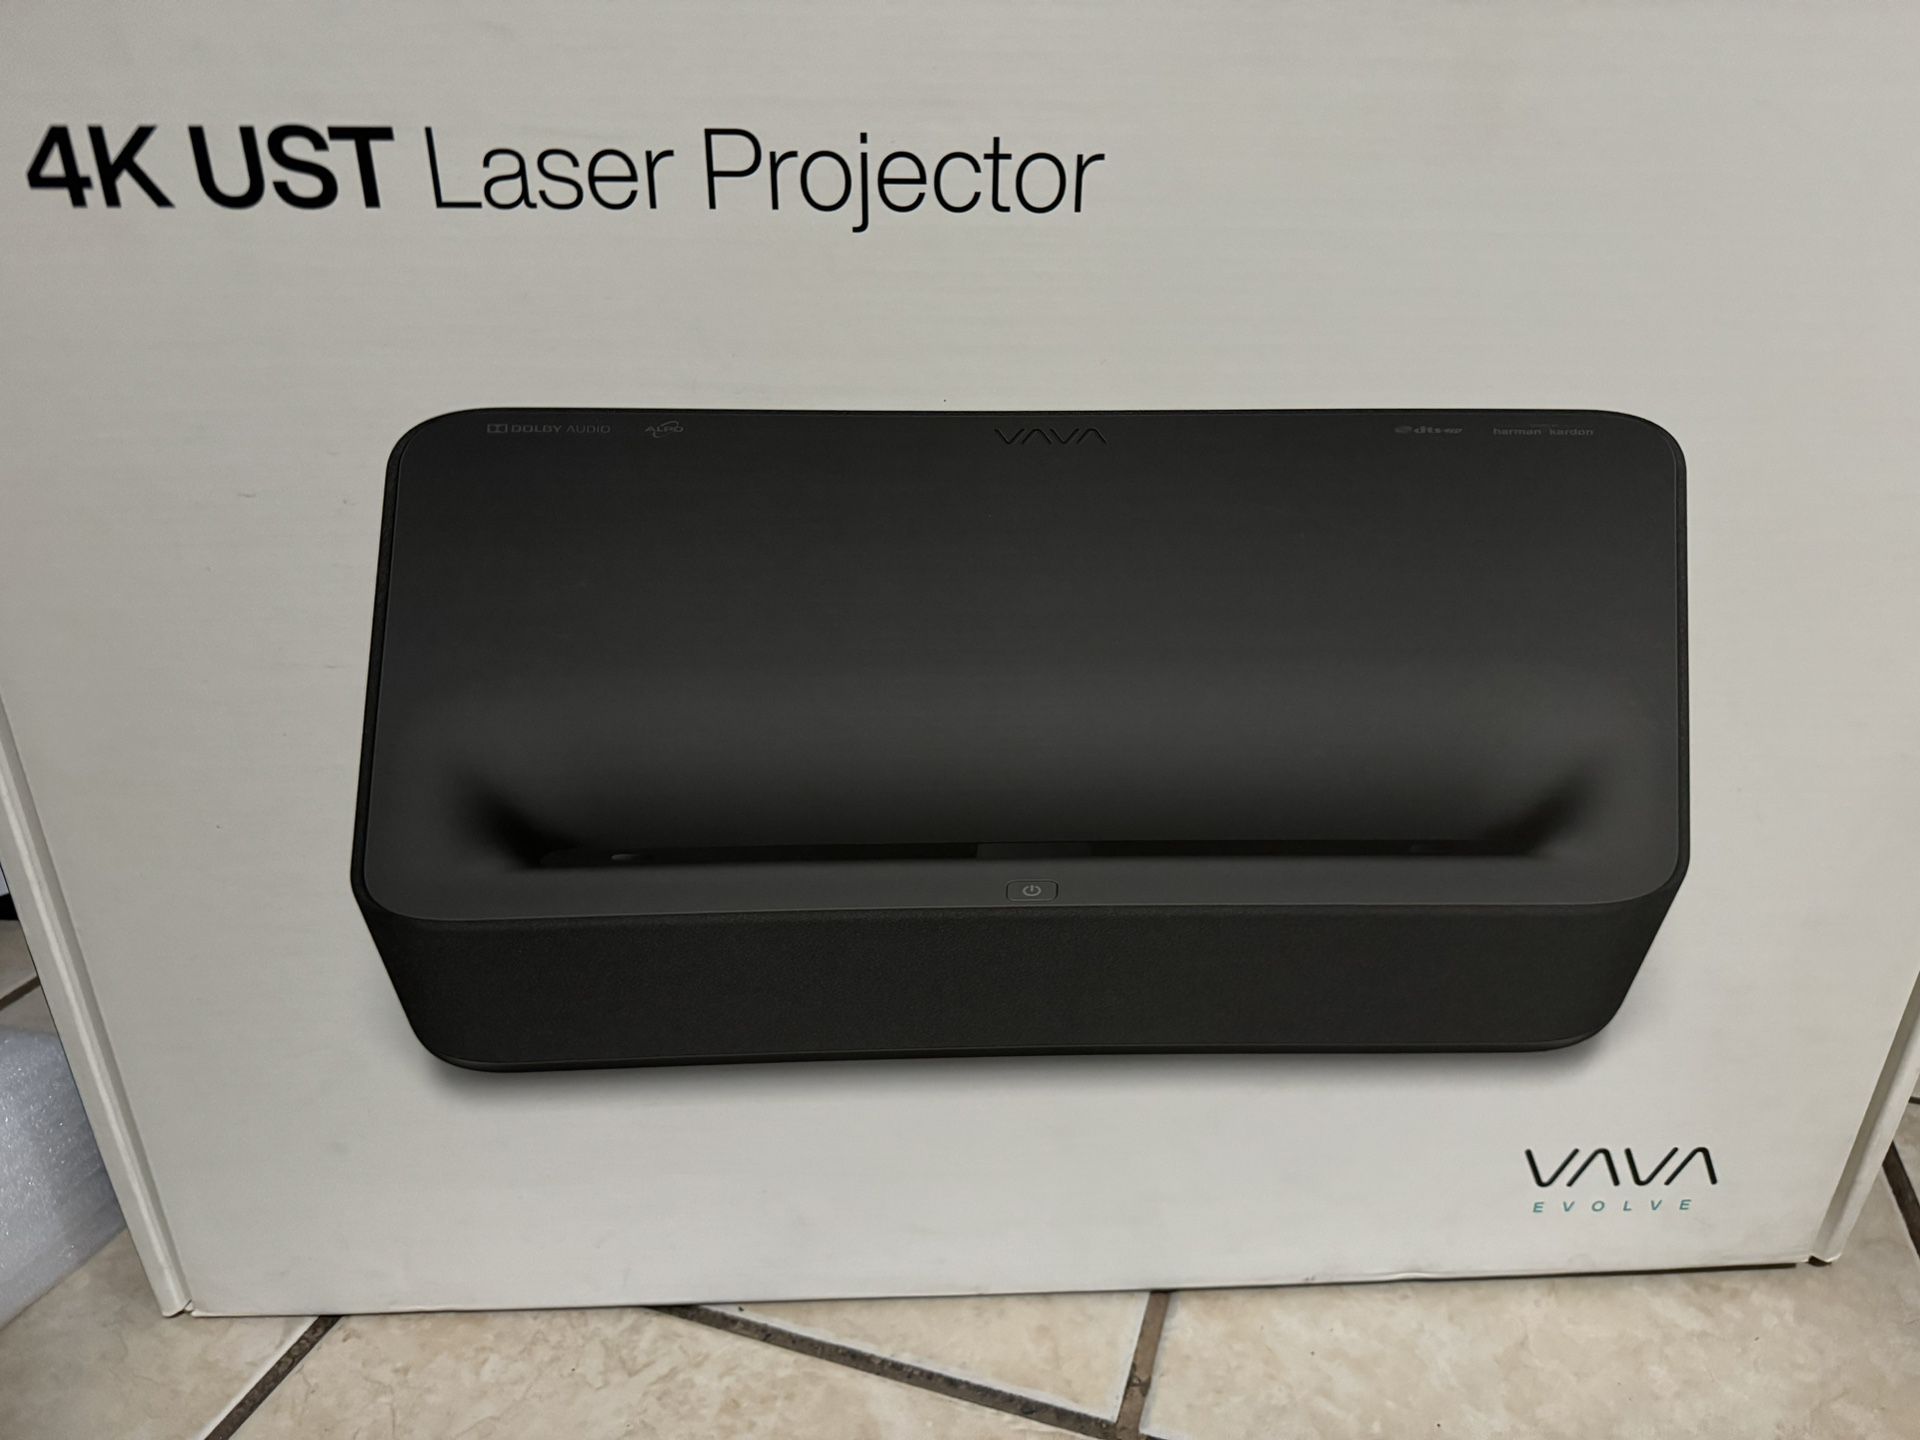 VAVA 4K UST Laser Projector (Comes with 120in Projector Screen And Apple TV)